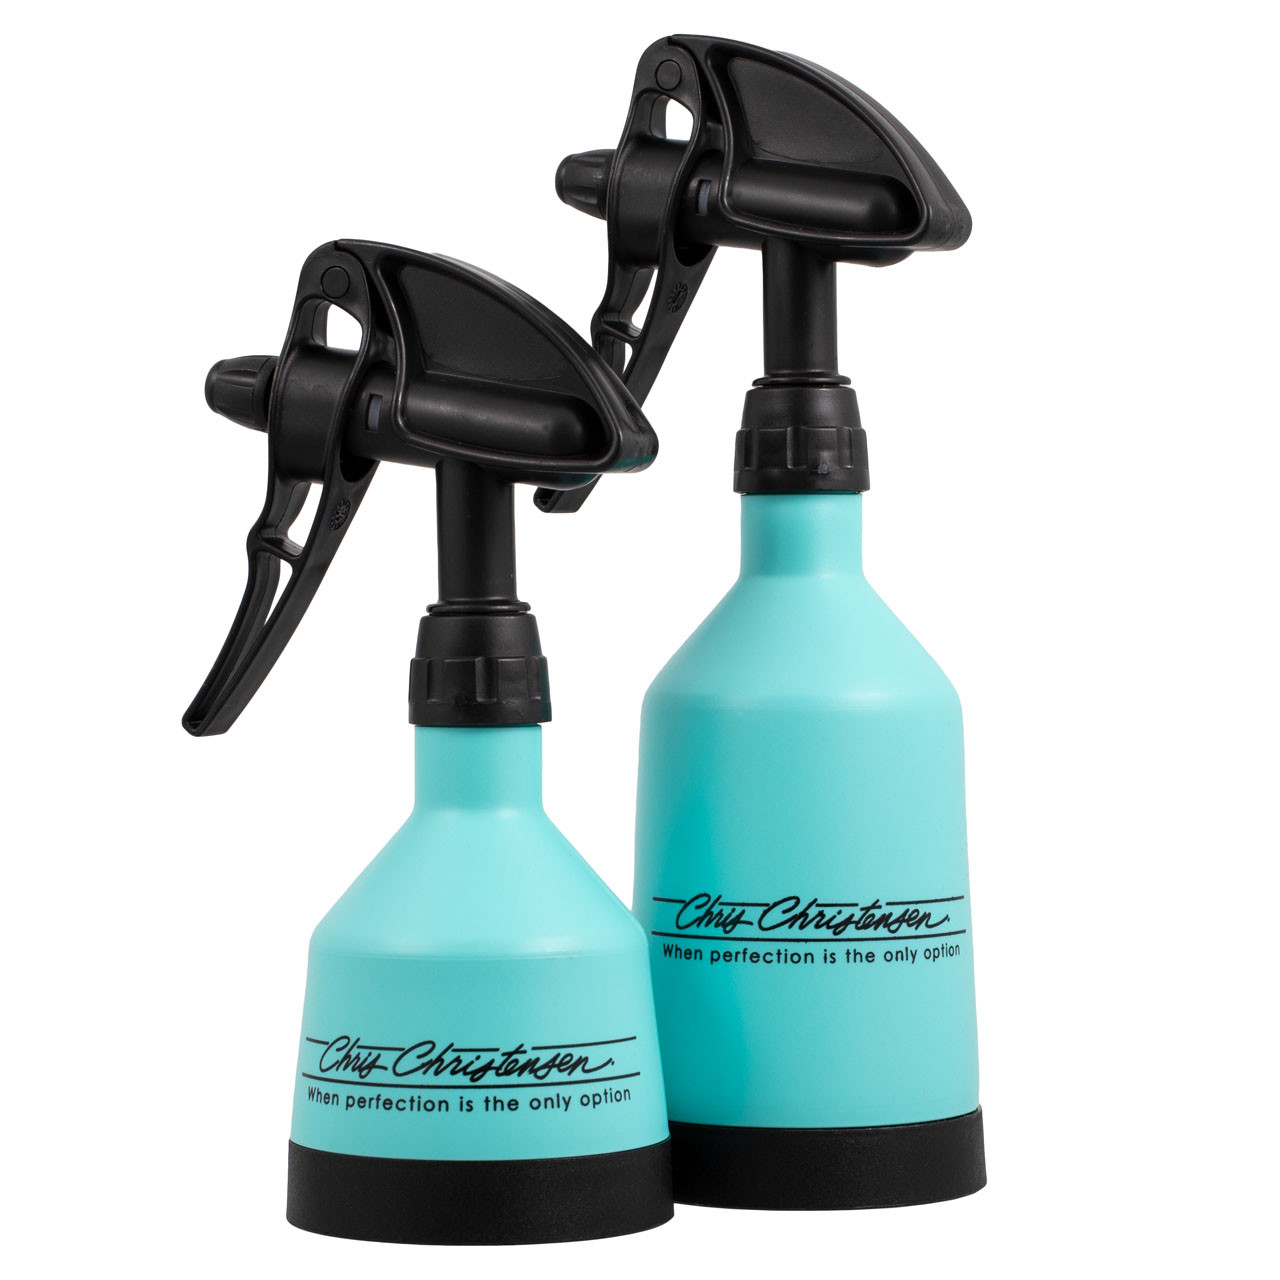 Heavy Duty Double Action Trigger Spray Bottles